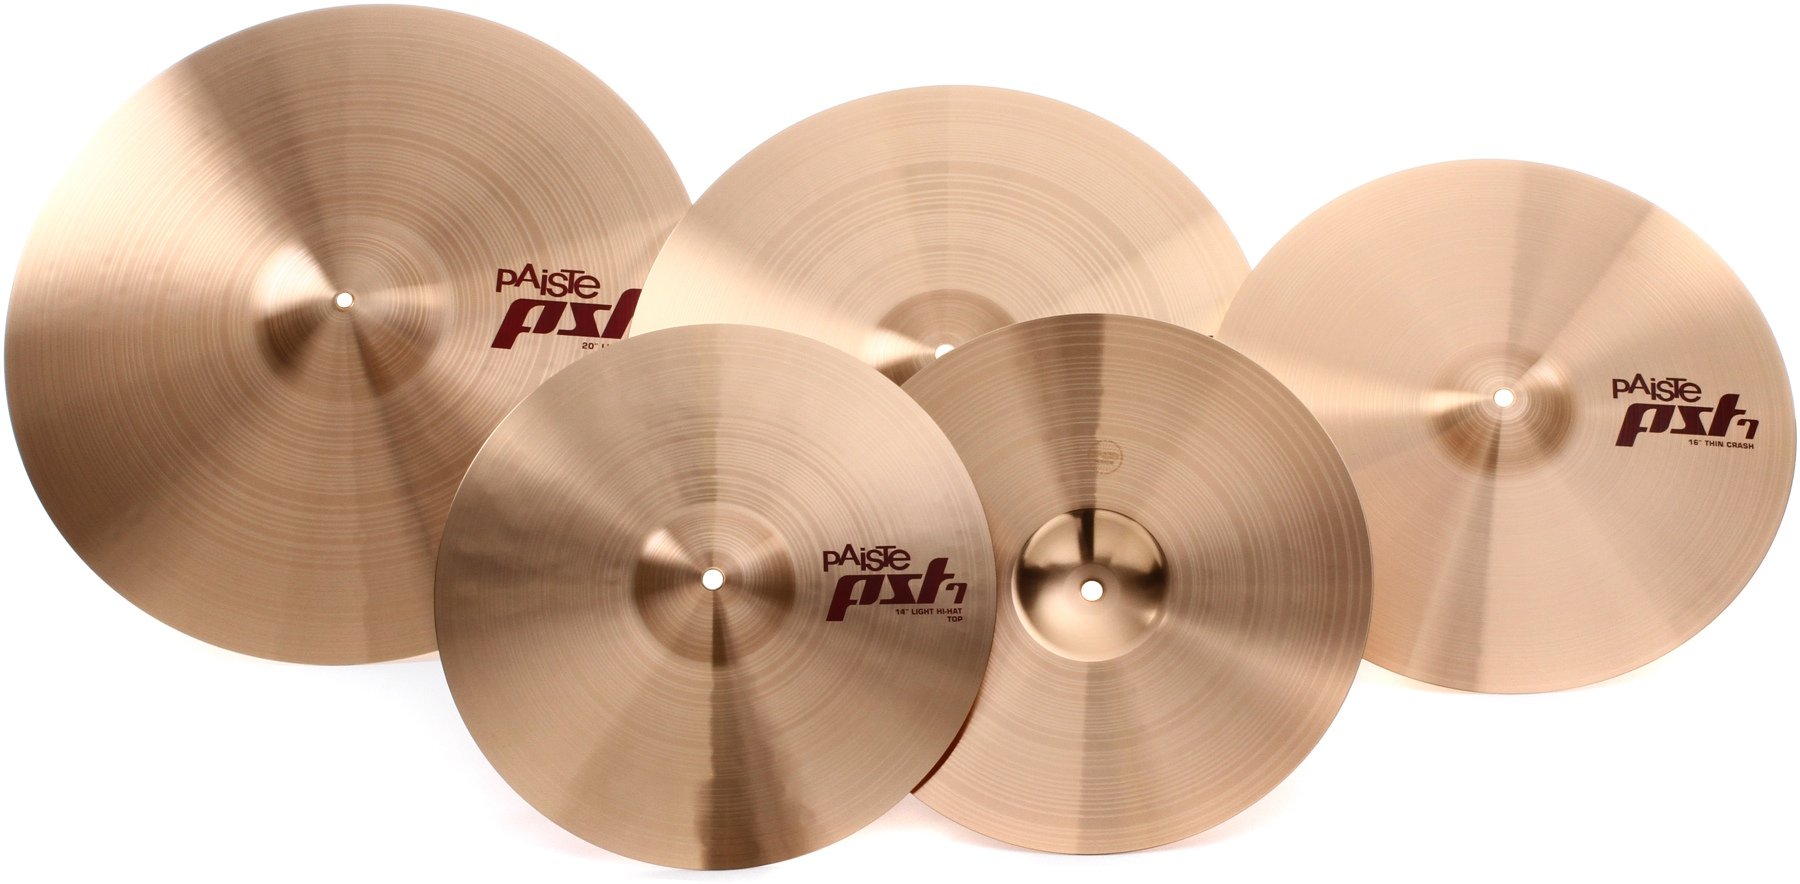 Paiste PST 7 Session Cymbal Set - 14/18/20 inch - with Free 16 